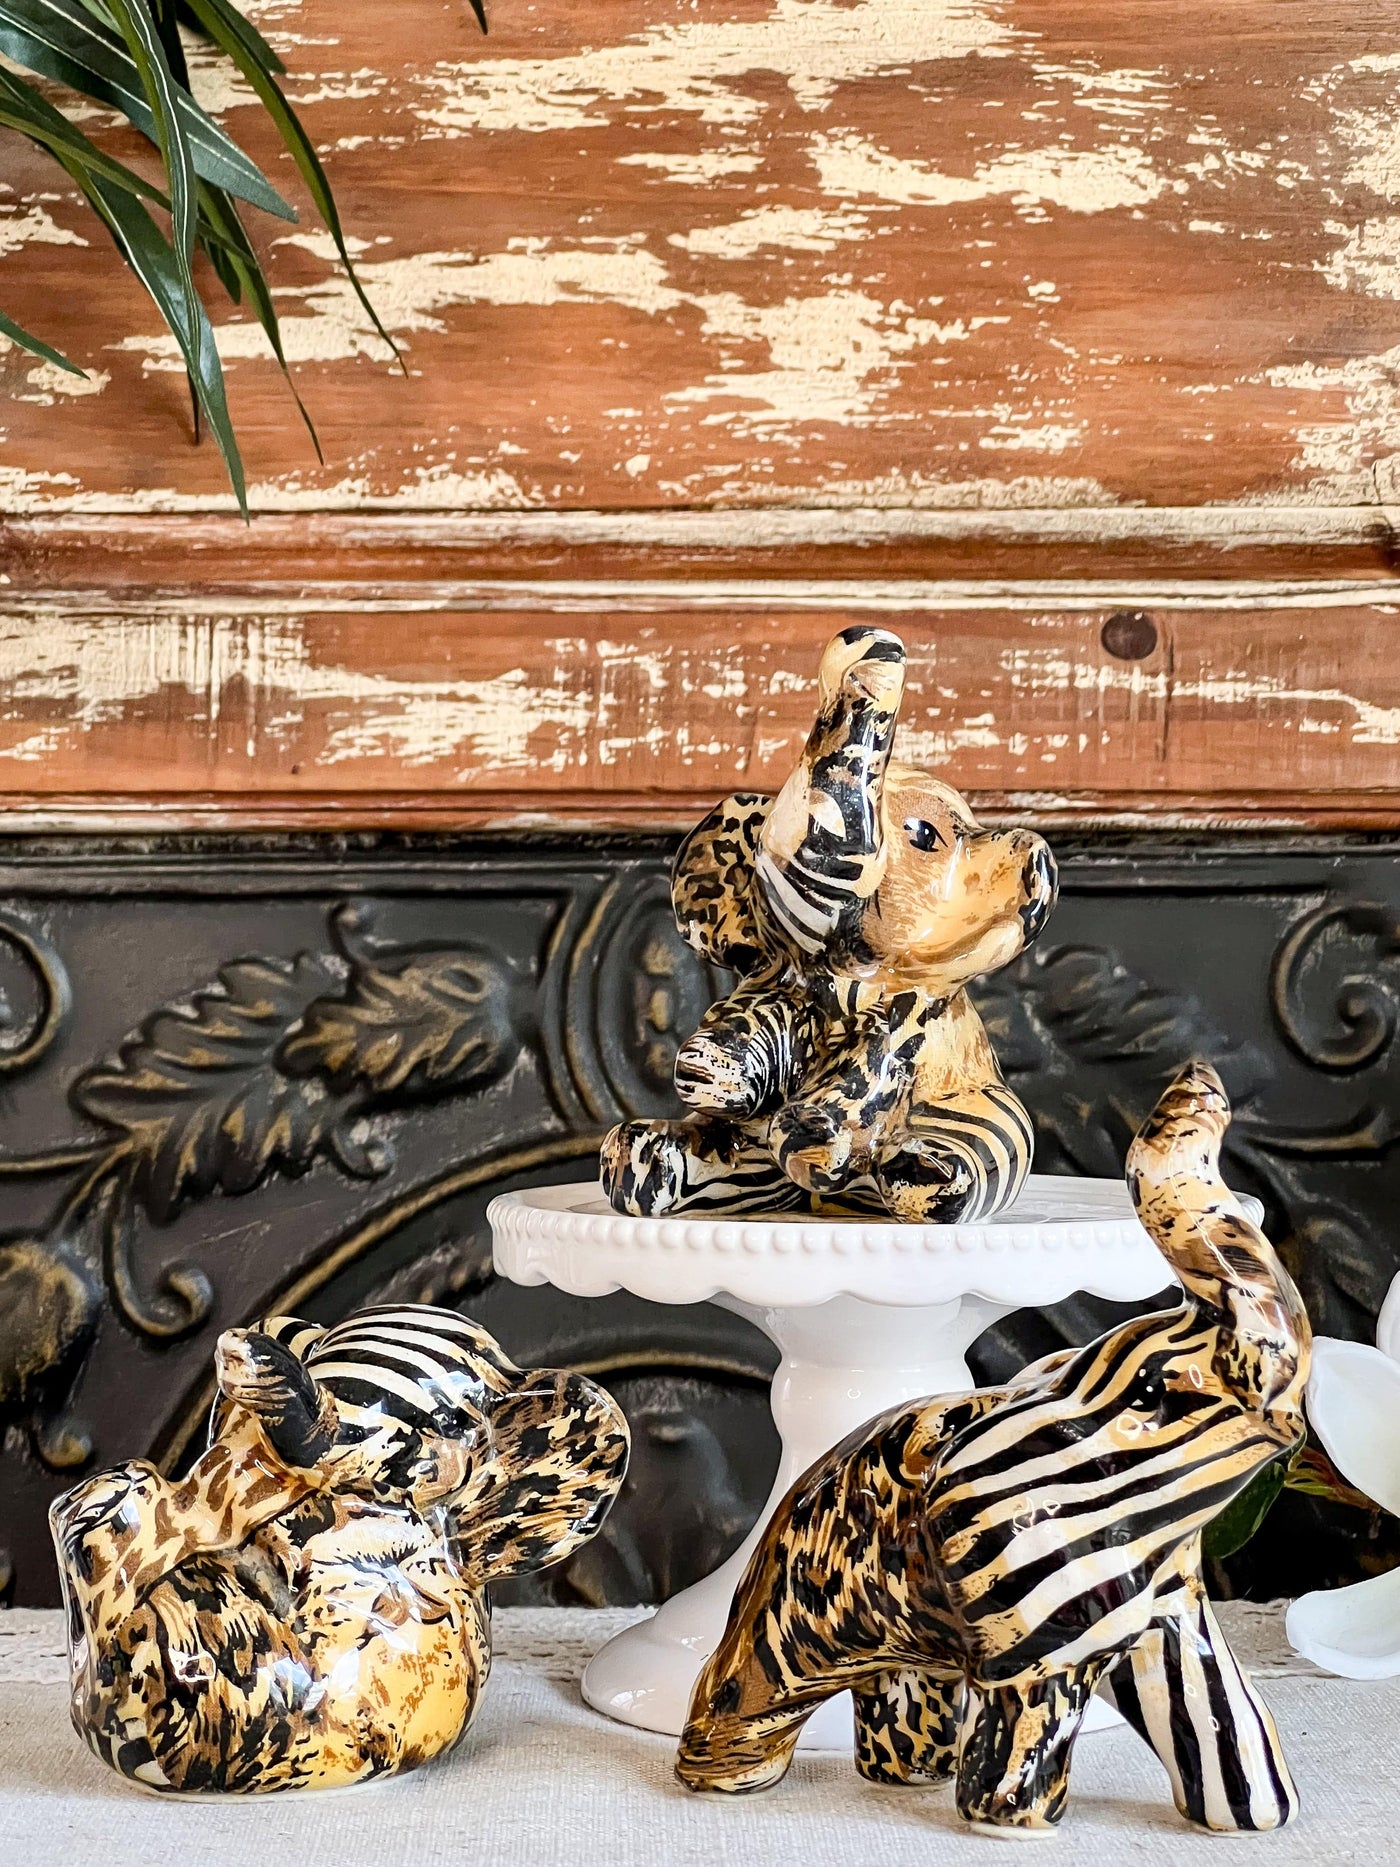 La Vie Glazed Porcelain Animal Print Patchwork Elephants (3 piece) Revive In Style Vintage Furniture Painted Refinished Redesign Beautiful One of a Kind Artistic Antique Unique Home Decor Interior Design French Country Shabby Chic Cottage Farmhouse Grandmillenial Coastal Chalk Paint Metallic Glam Eclectic Quality Dovetailed Rustic Furniture Painter Pinterest Bedroom Living Room Entryway Kitchen Home Trends House Styles Decorating ideas